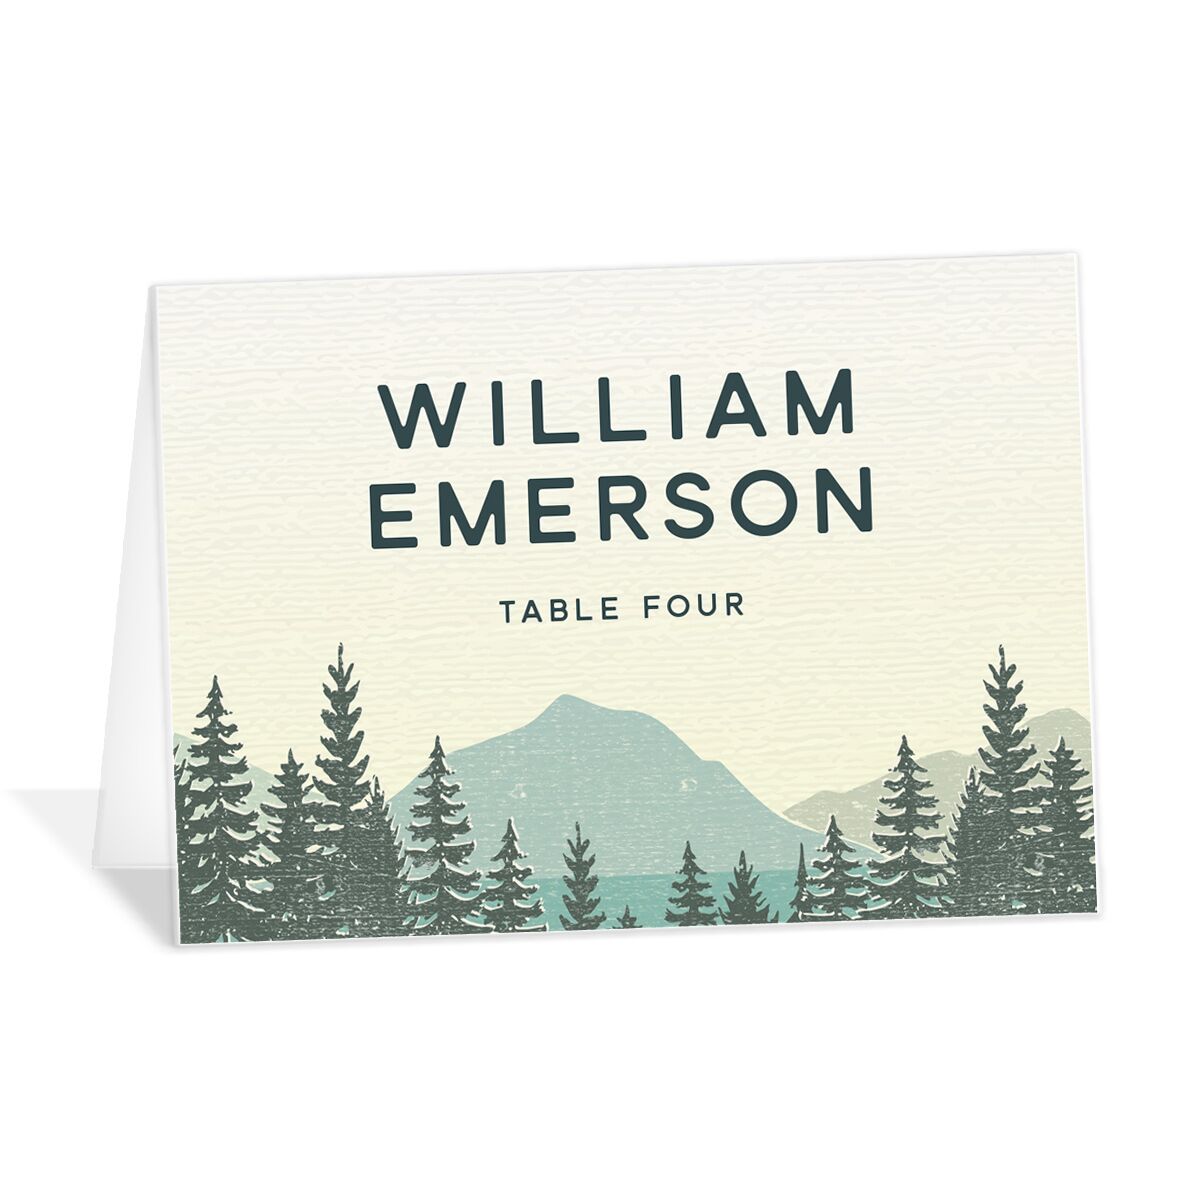 Vintage Mountain Place Cards